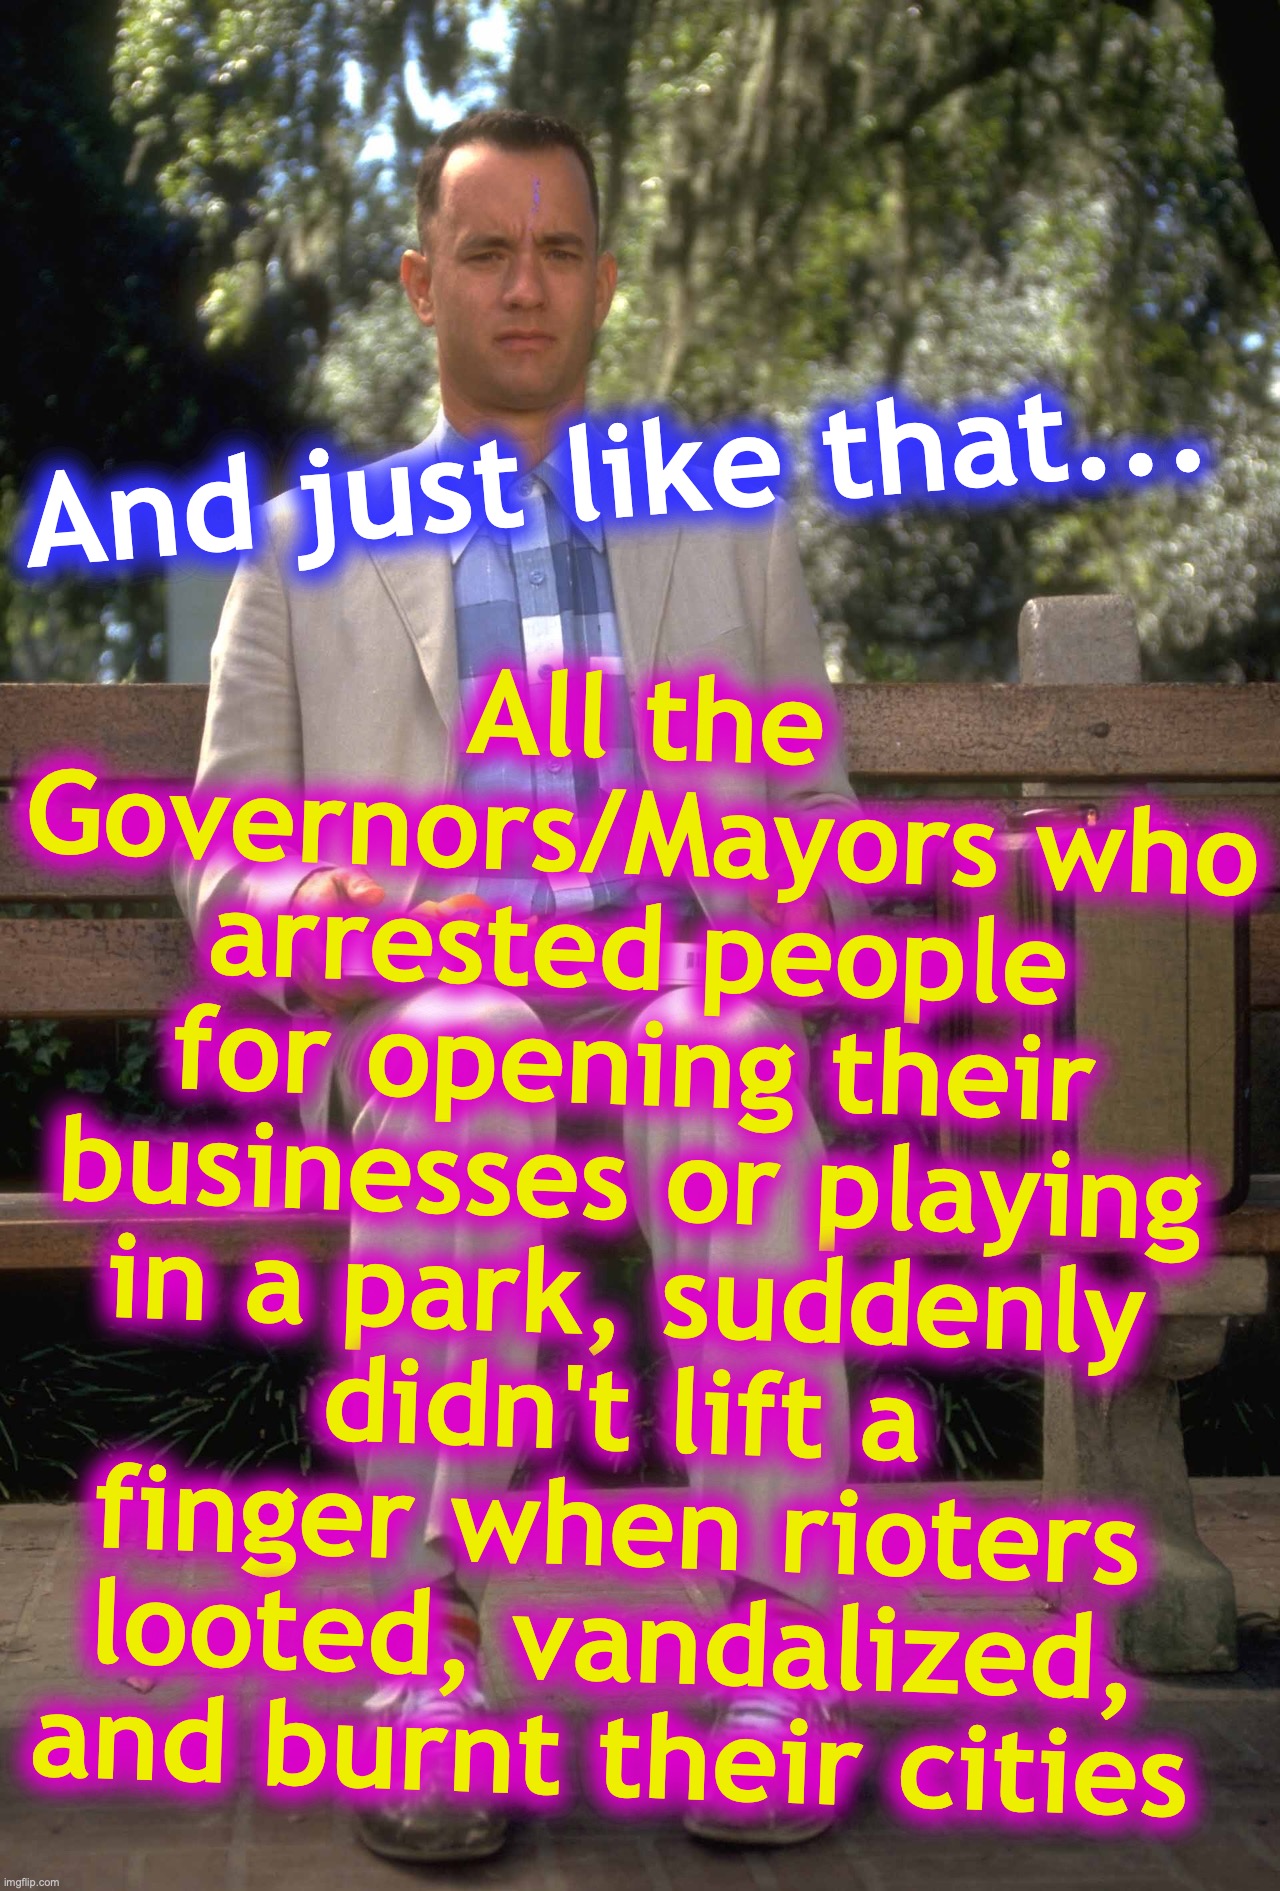 really think about this one | All the Governors/Mayors who arrested people for opening their businesses or playing in a park, suddenly didn't lift a finger when rioters looted, vandalized, and burnt their cities; And just like that... | image tagged in forrest gump,covid-19,lockdown,shutdown,social distancing,rioters | made w/ Imgflip meme maker